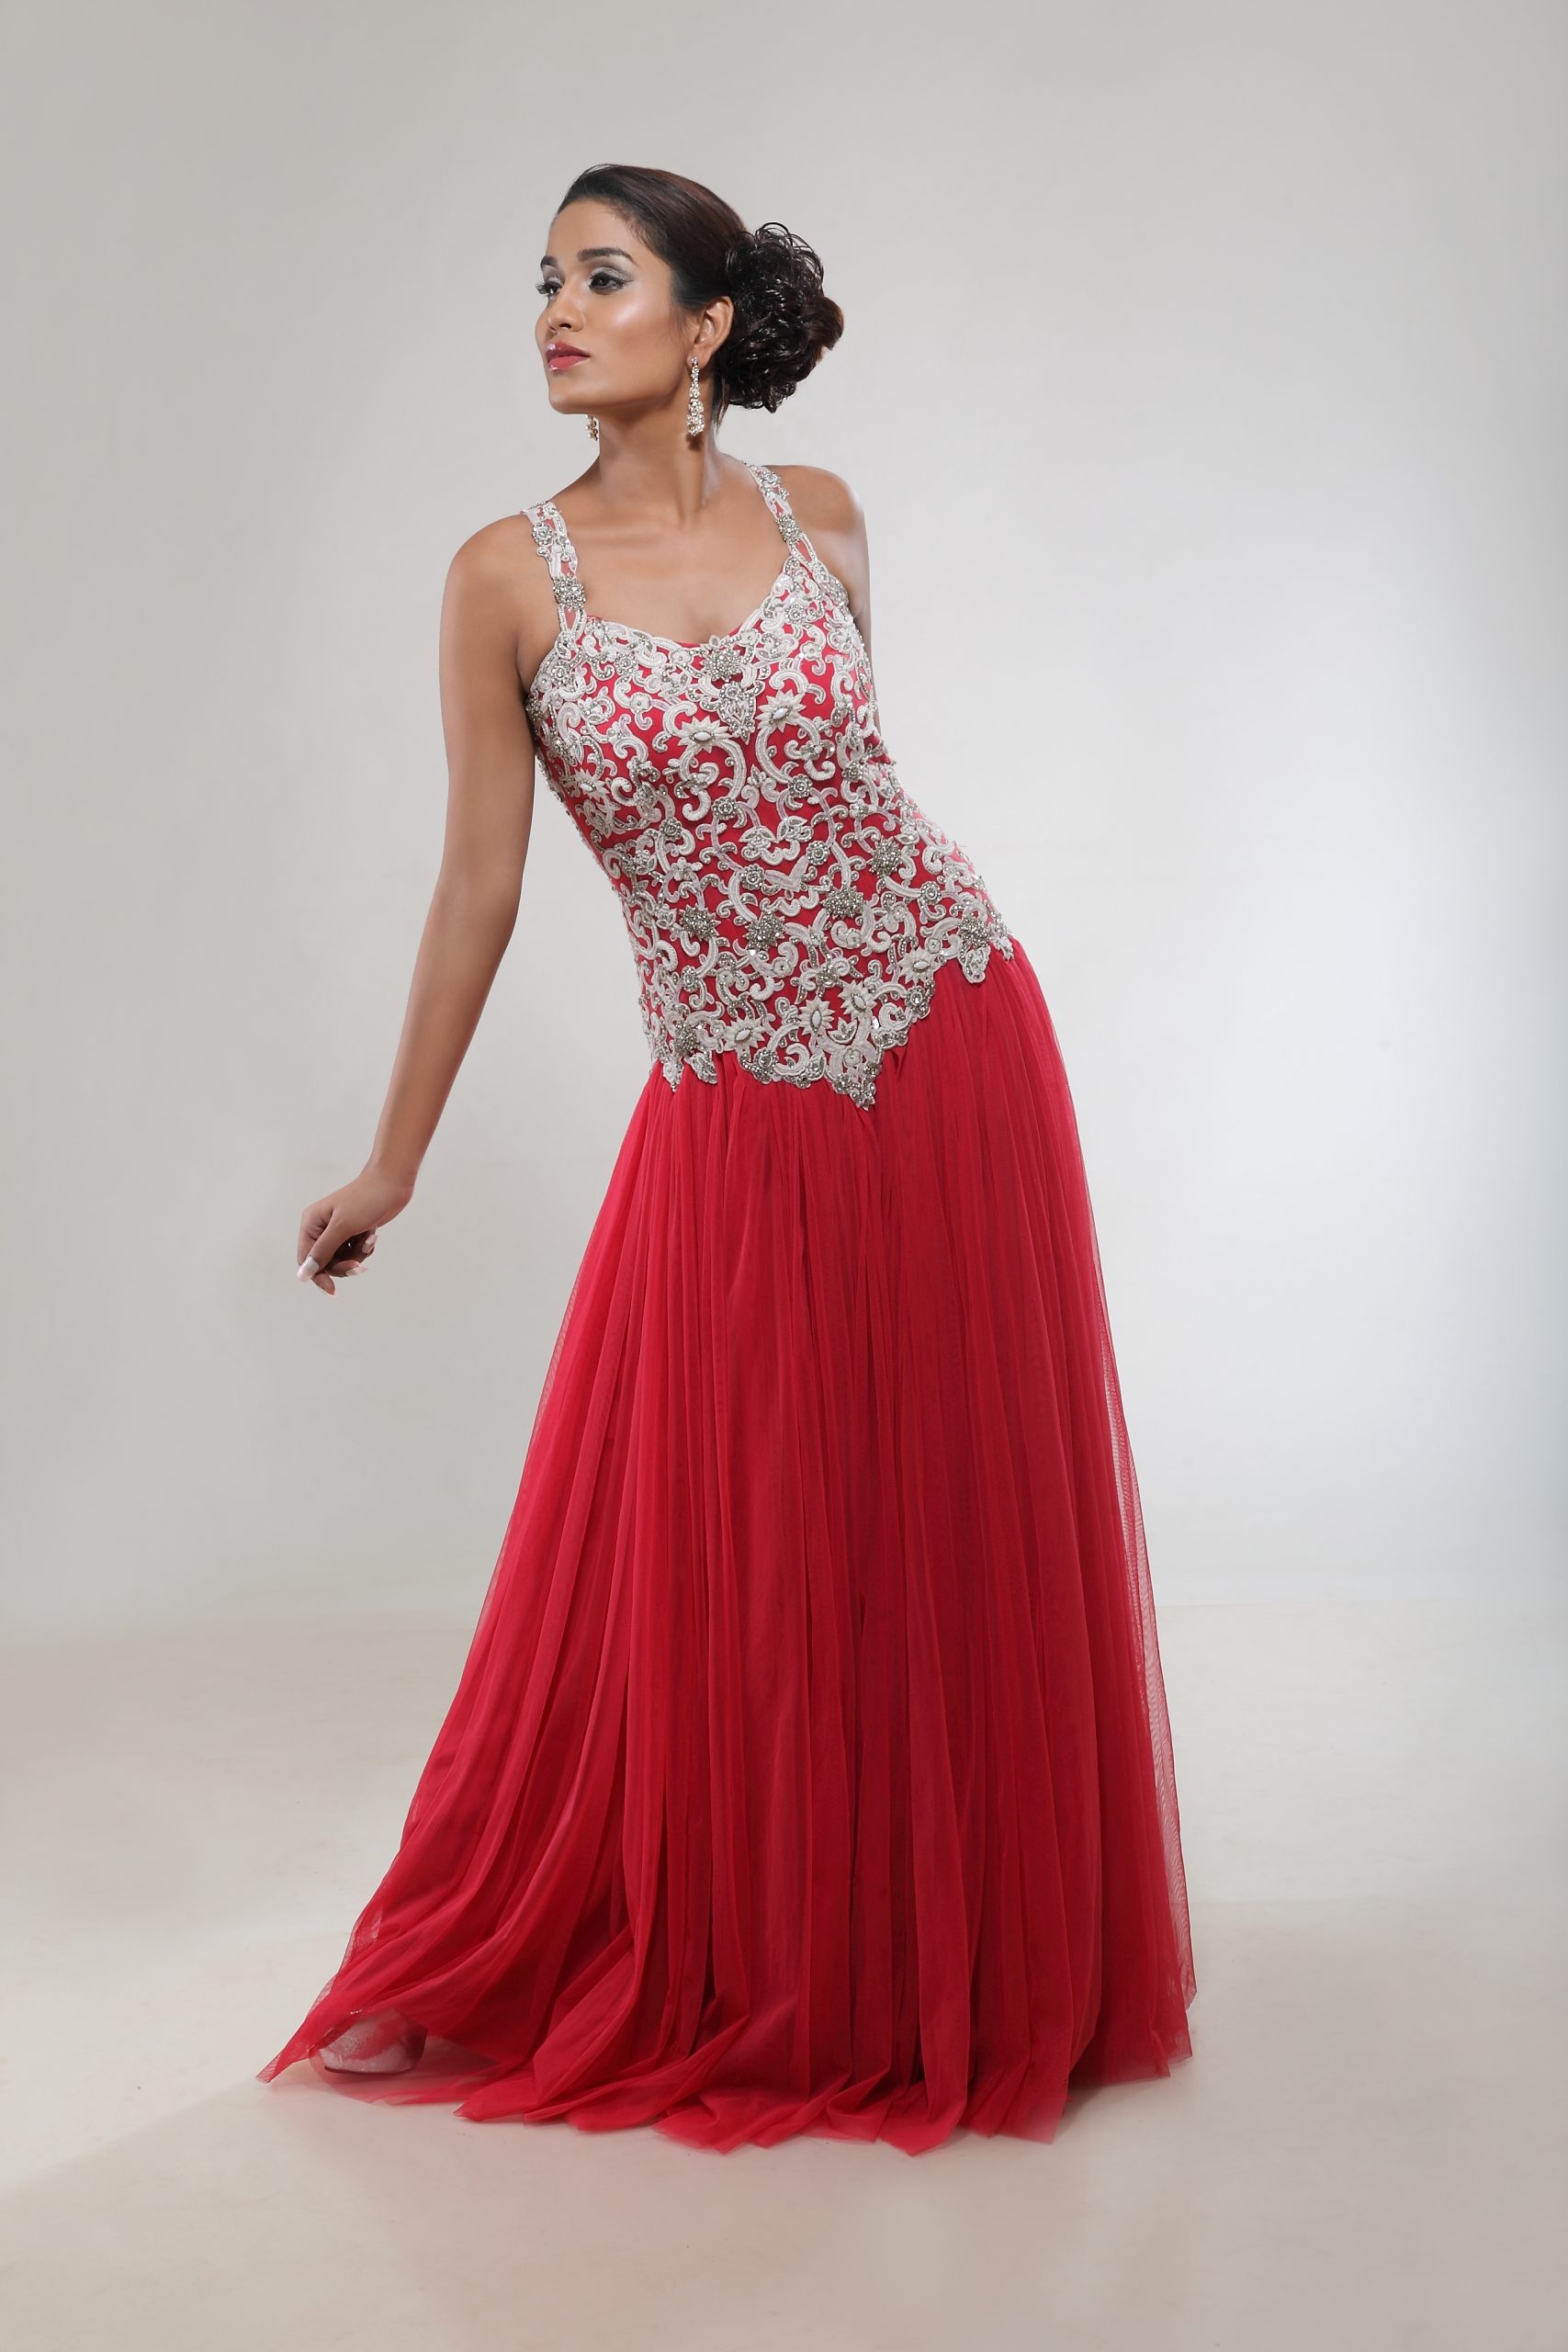 Red Sparkle Ball Gown Wedding Gowns at Rs 16990 in New Delhi | ID:  23743542891